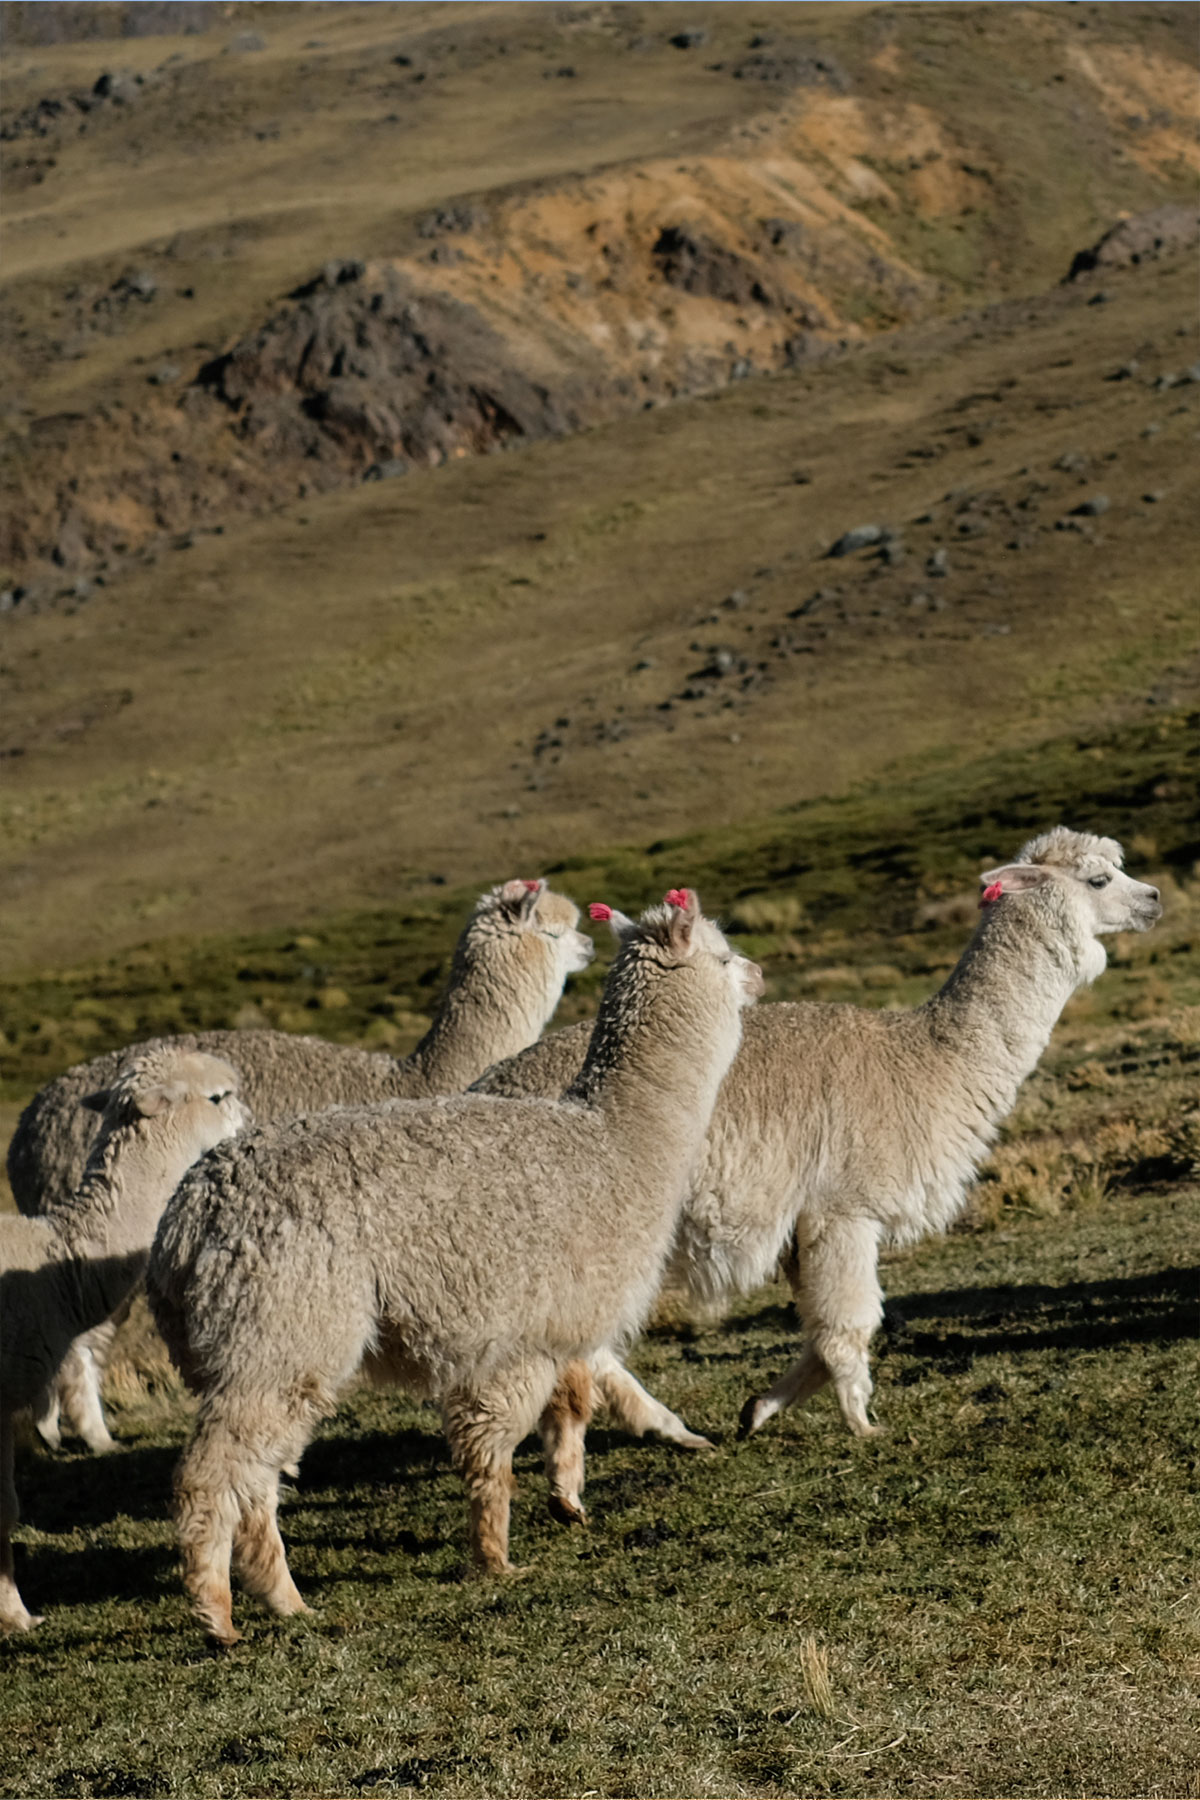 A herd of alpacas captured mid-movement in a highland pasture. The focus is on their thick, woolly coats and the dynamic of the group as they traverse the terrain with a backdrop of gentle hills under a clear sky.